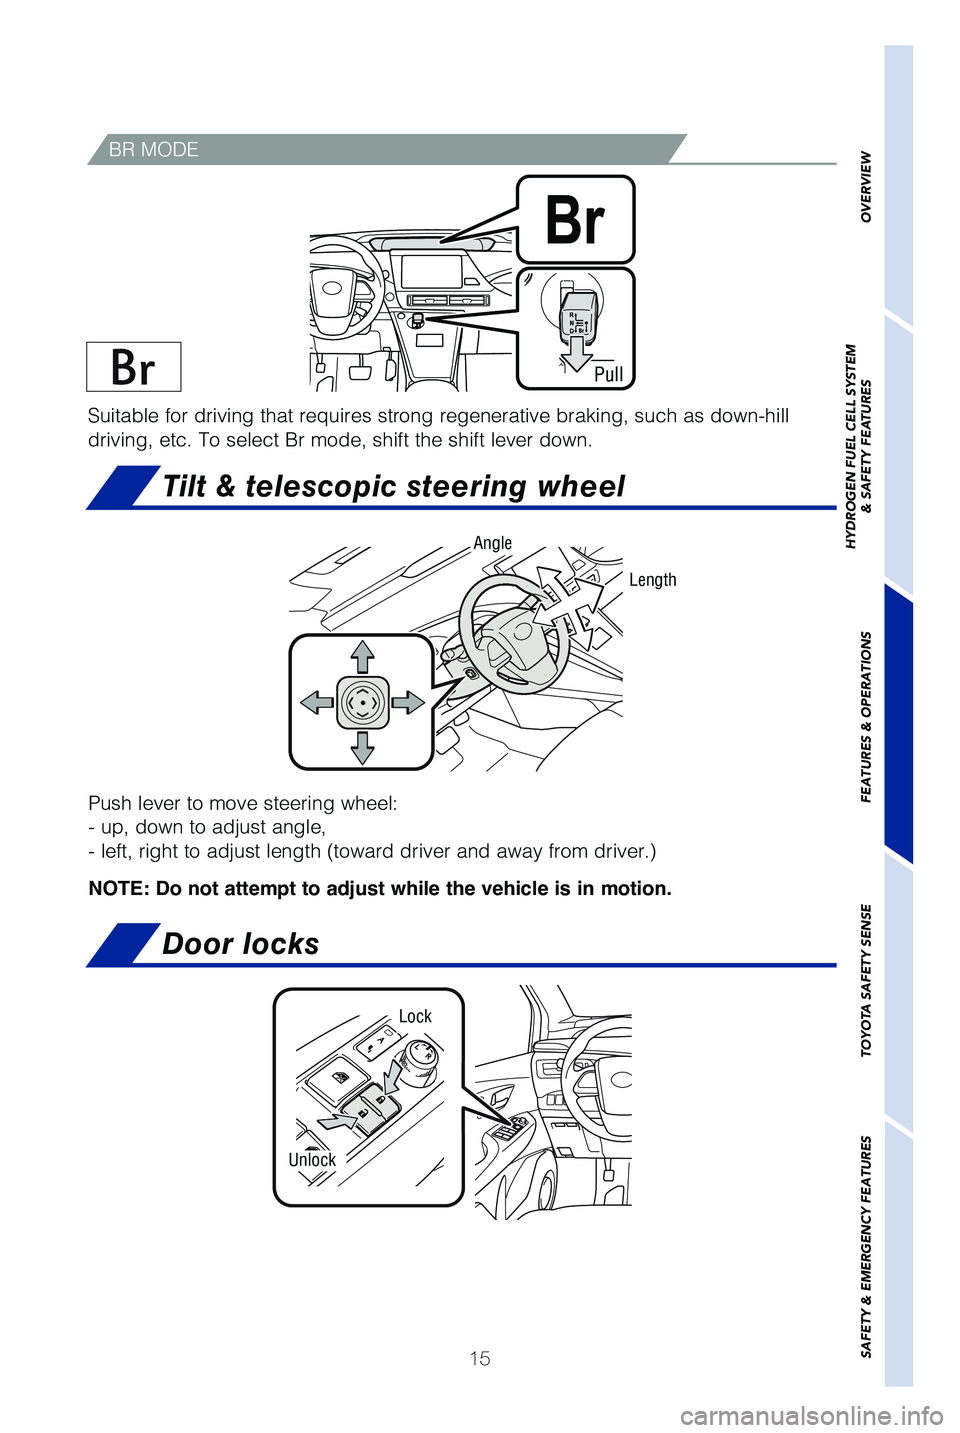 TOYOTA MIRAI 2019  Owners Manual (in English) 15
Push lever to move steering wheel:
� �V�Q�
 �E�P�X�O �U�P �B�E�K�V�T�U �B�O�H�M�F�
 
� �M�F�G�U�
 �S�J�H�I�U �U�P �B�E�K�V�T�U �M�F�O�H�U�I �	�U�P�X�B�S�E �E�S�J�W�F�S �B�O�E �B�X�B�Z �G�S�P�N �E